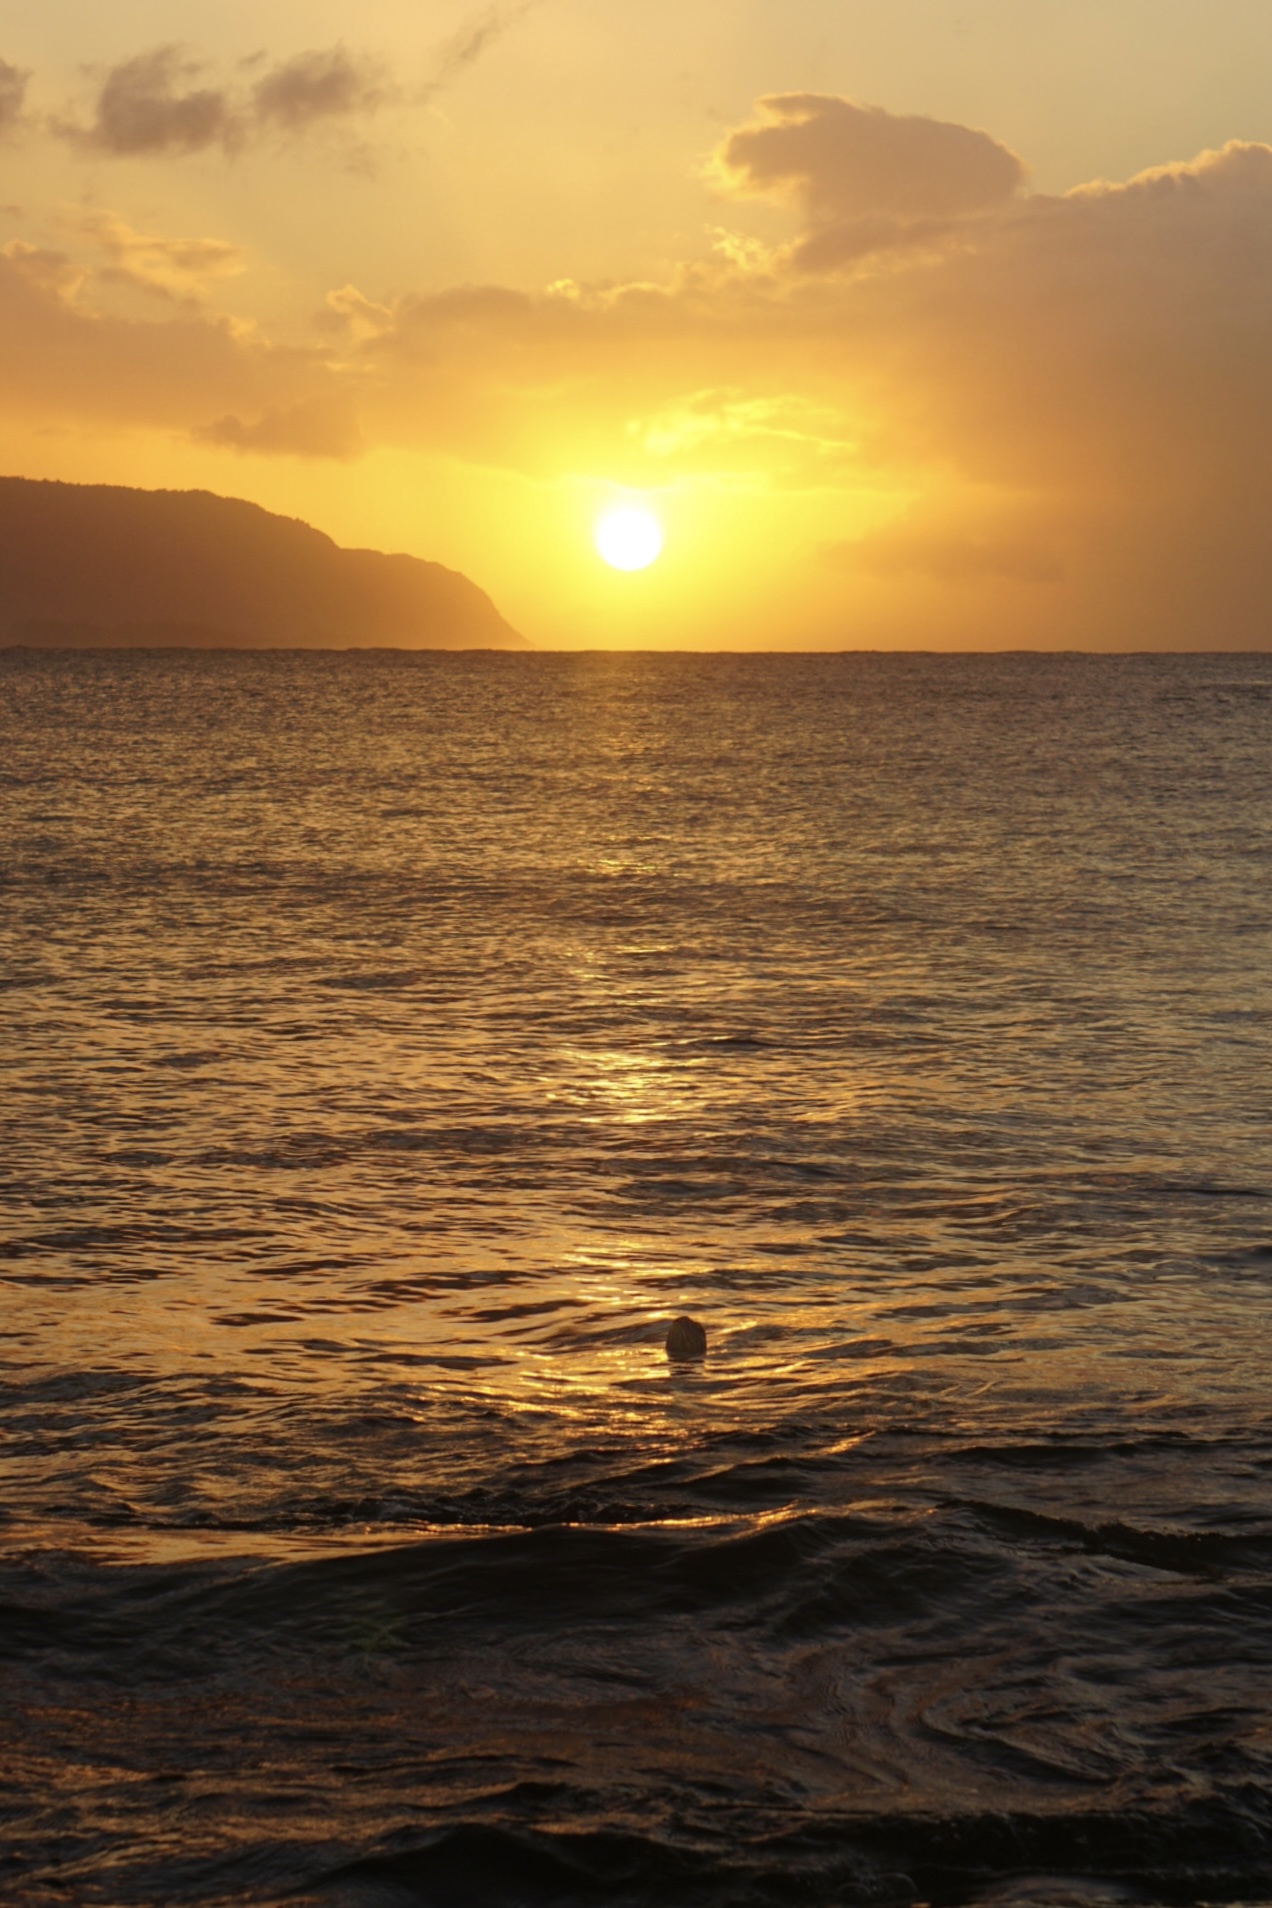 Turtle coming up for air at Haleiwa Beach during sunset